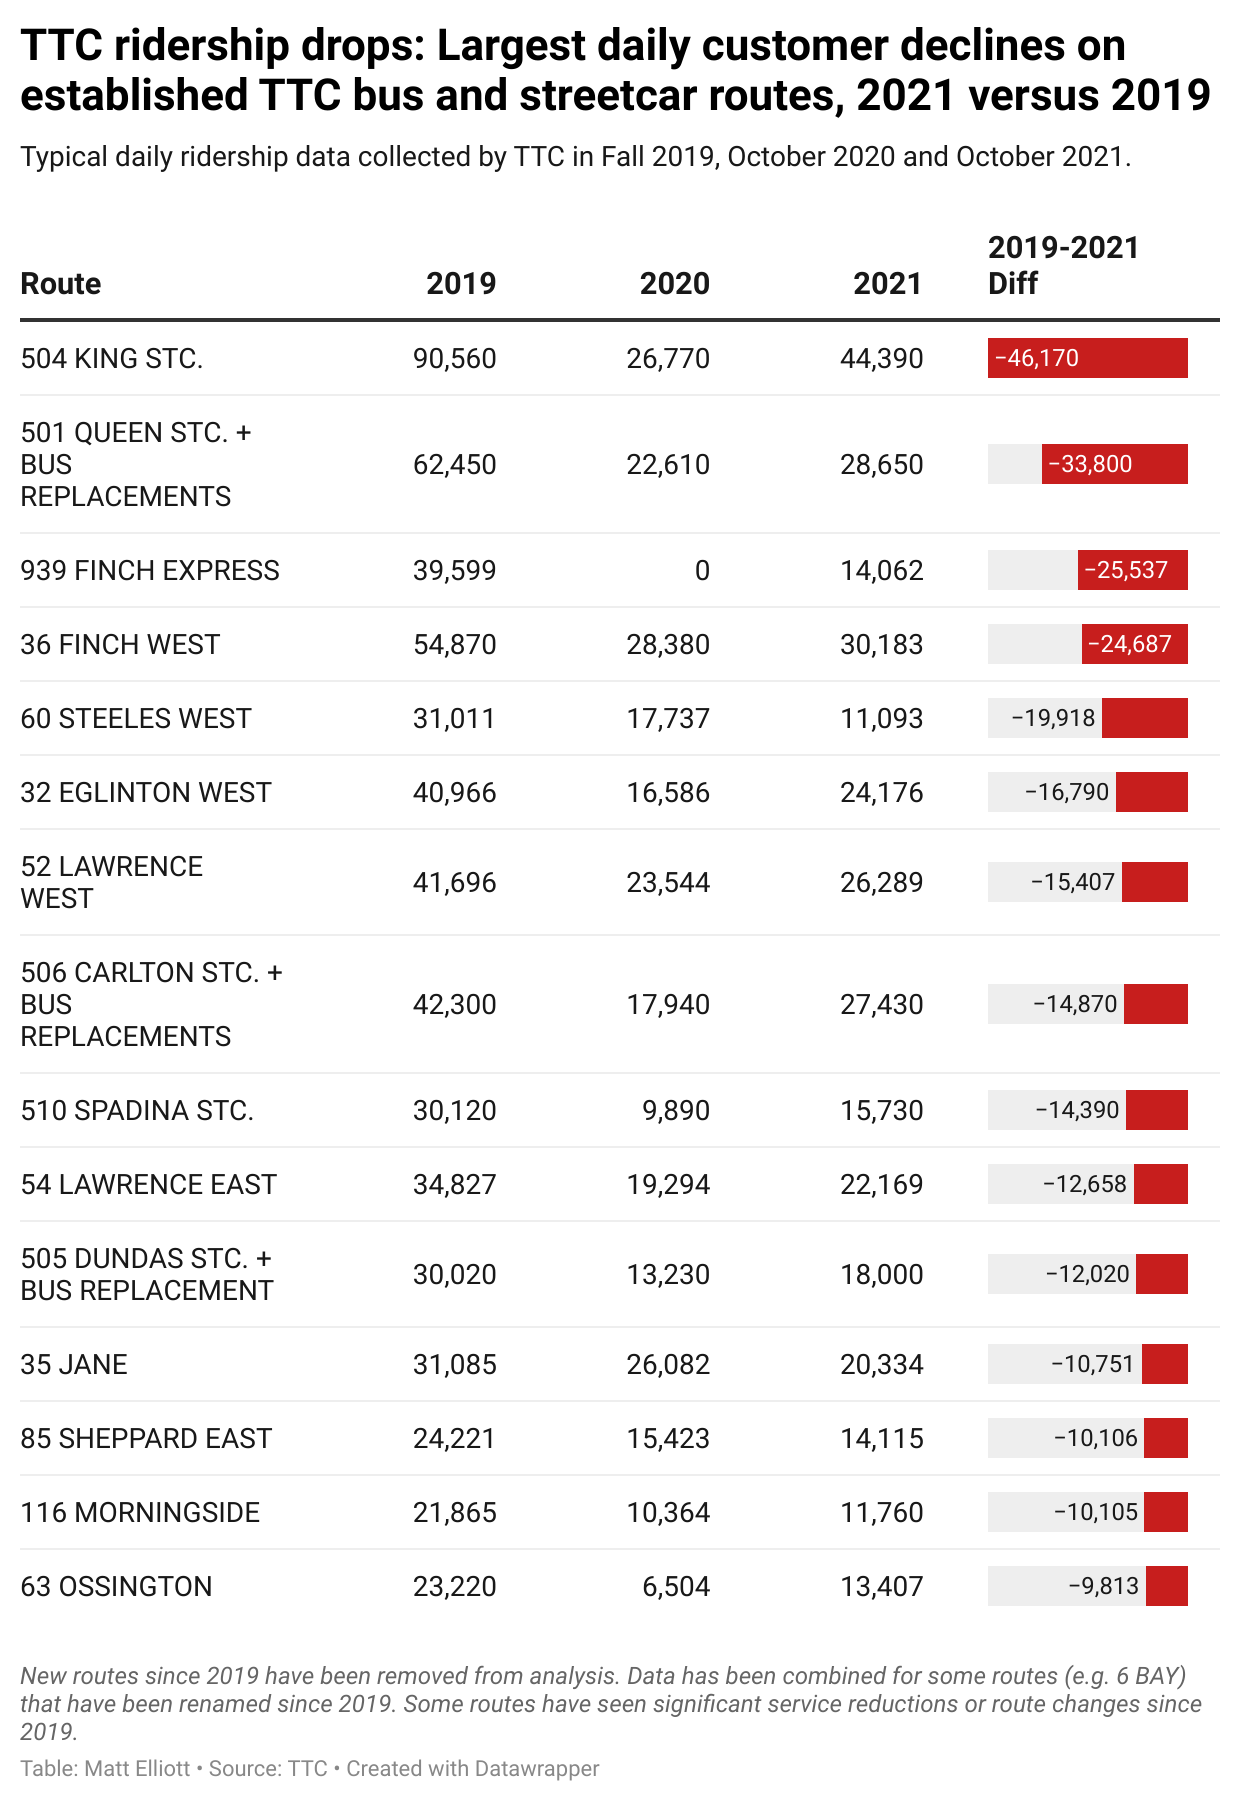 A table showing the TTC routes with the biggest ridership declines, 2019-2021